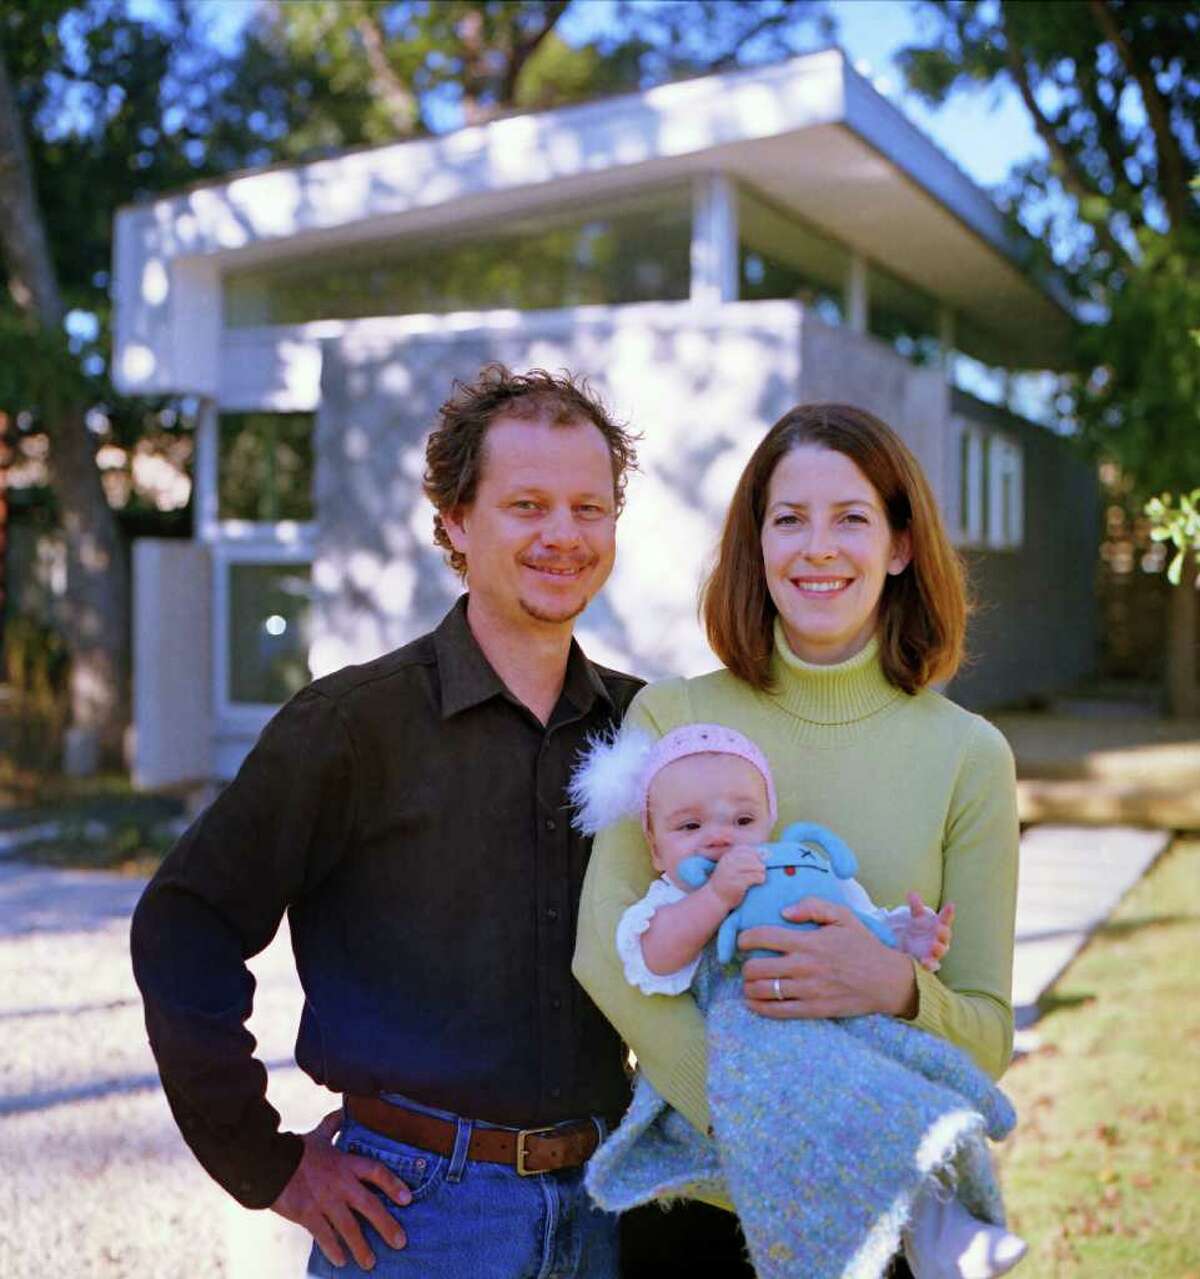 Mark Schatz and Anne Eamon, who now have a daughter, Wren, have been experimenting with ways to live well on a small scale for about 14 years.